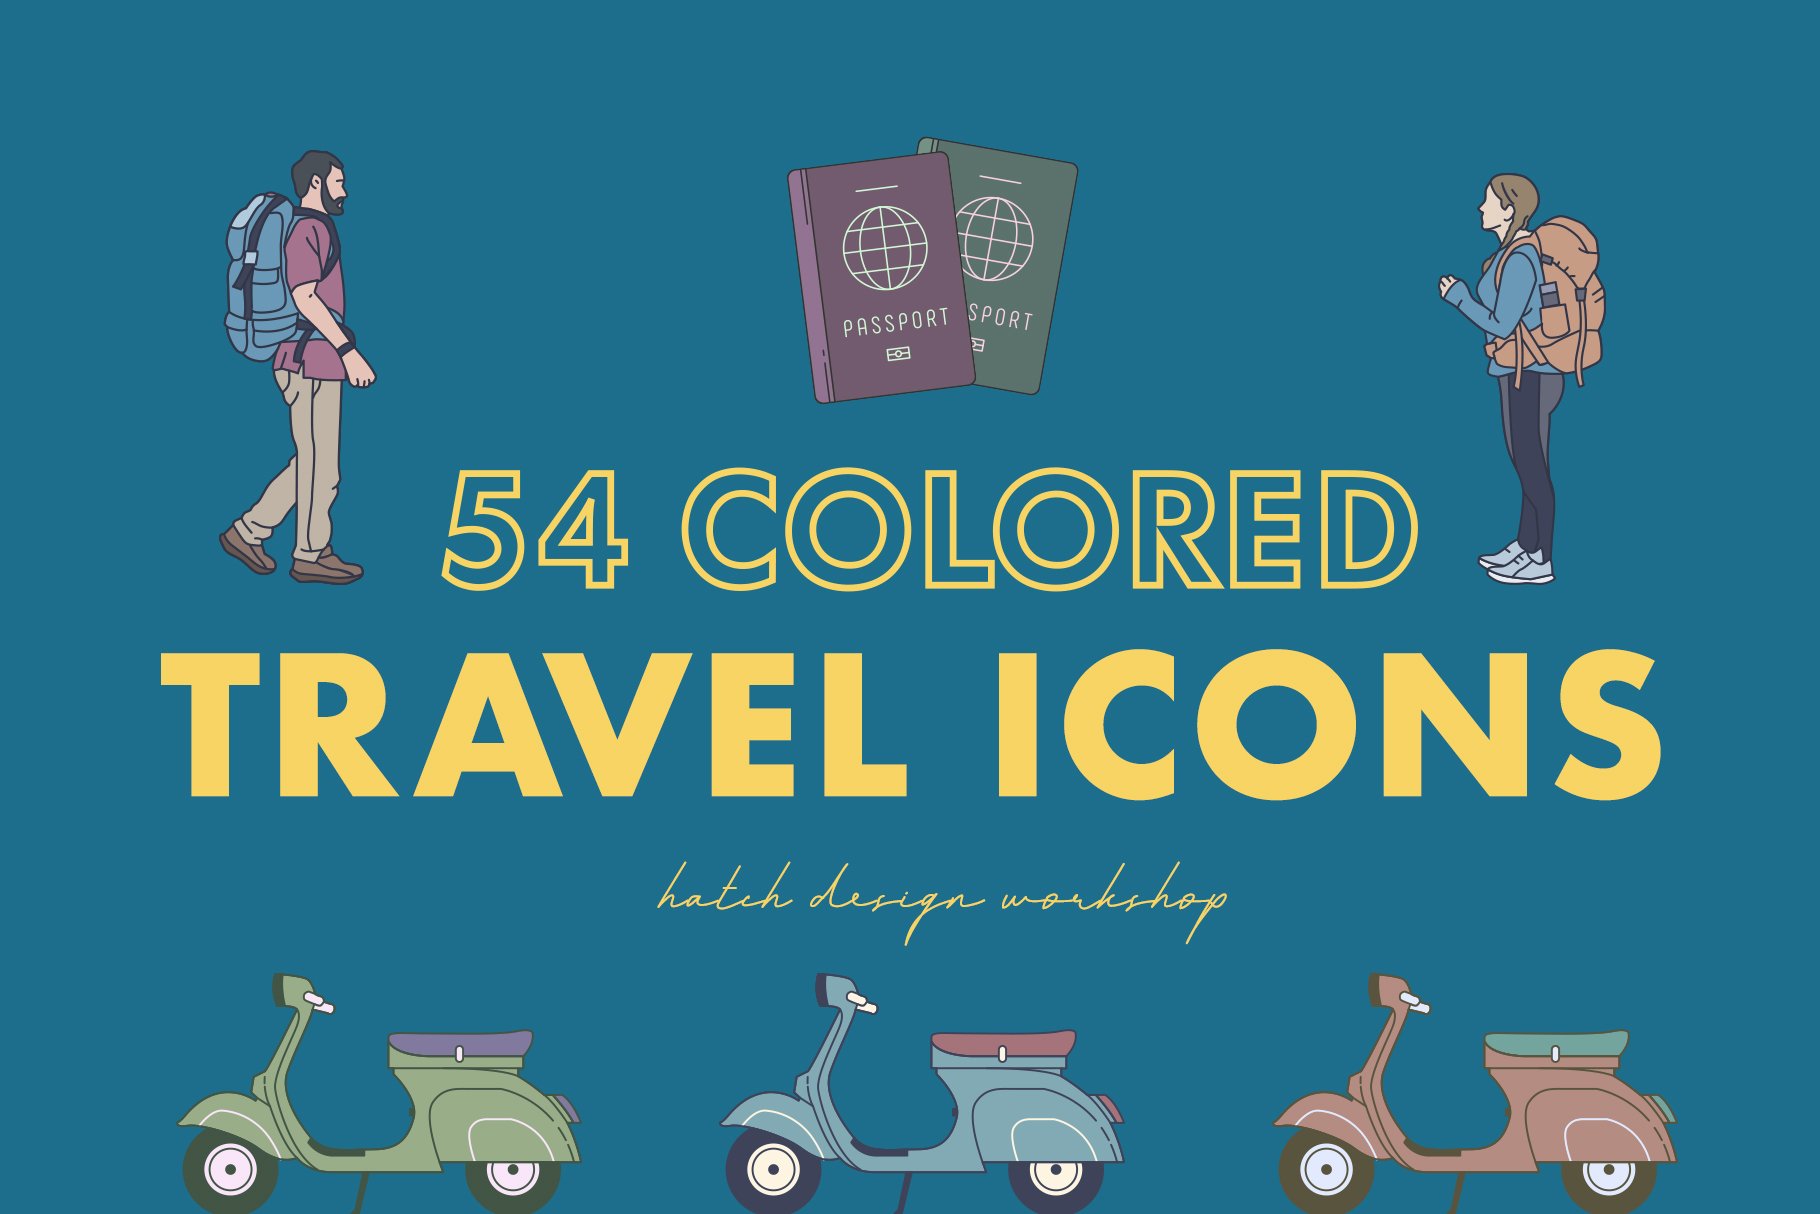 11 wes anderson icons 401